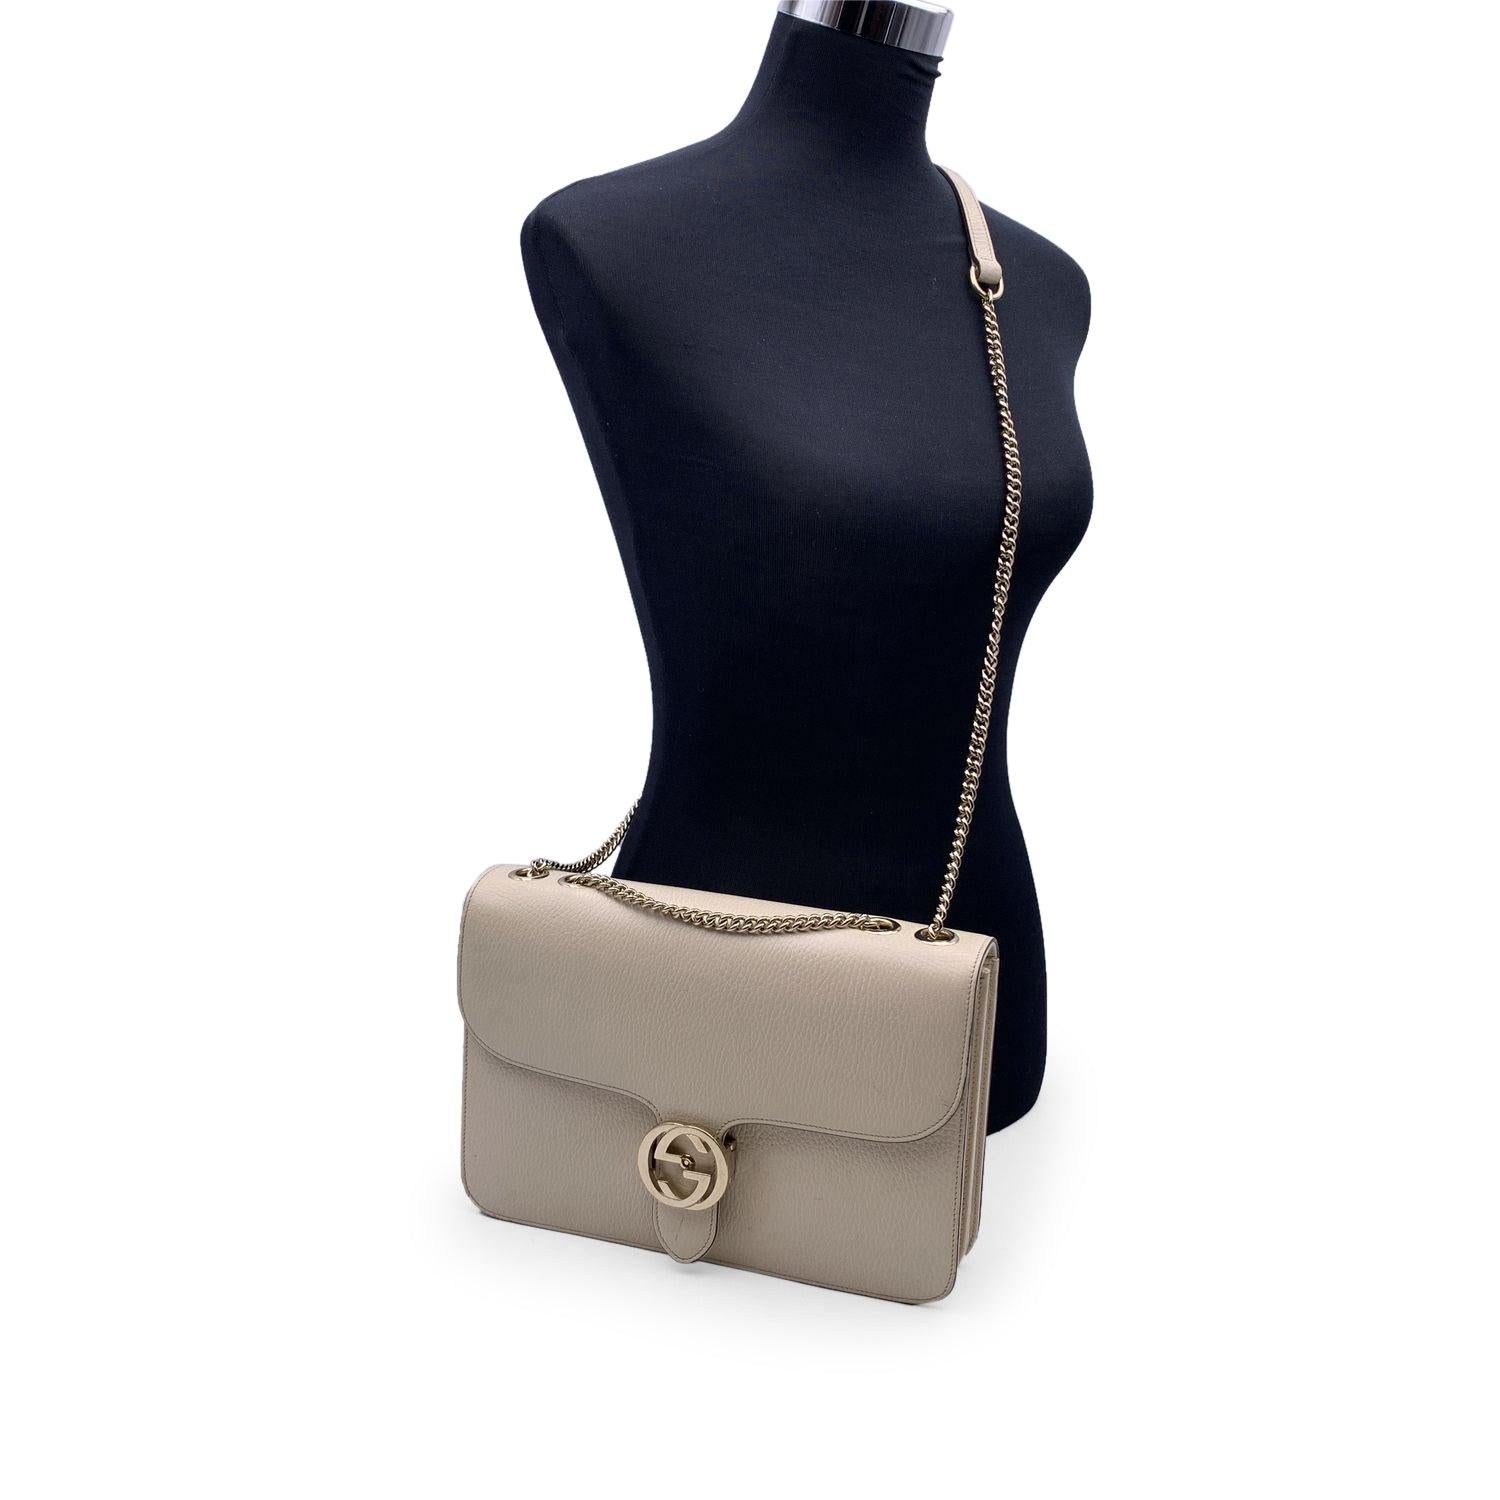 Beautiful Gucci Interlocking GG dollar shoulder bag in beige leather. The bag features a flap with double GG logo in gold-tone metal on the front and a chain and leather shoulder strap to wear over the shoulder or across the body. Canvas lining. 2